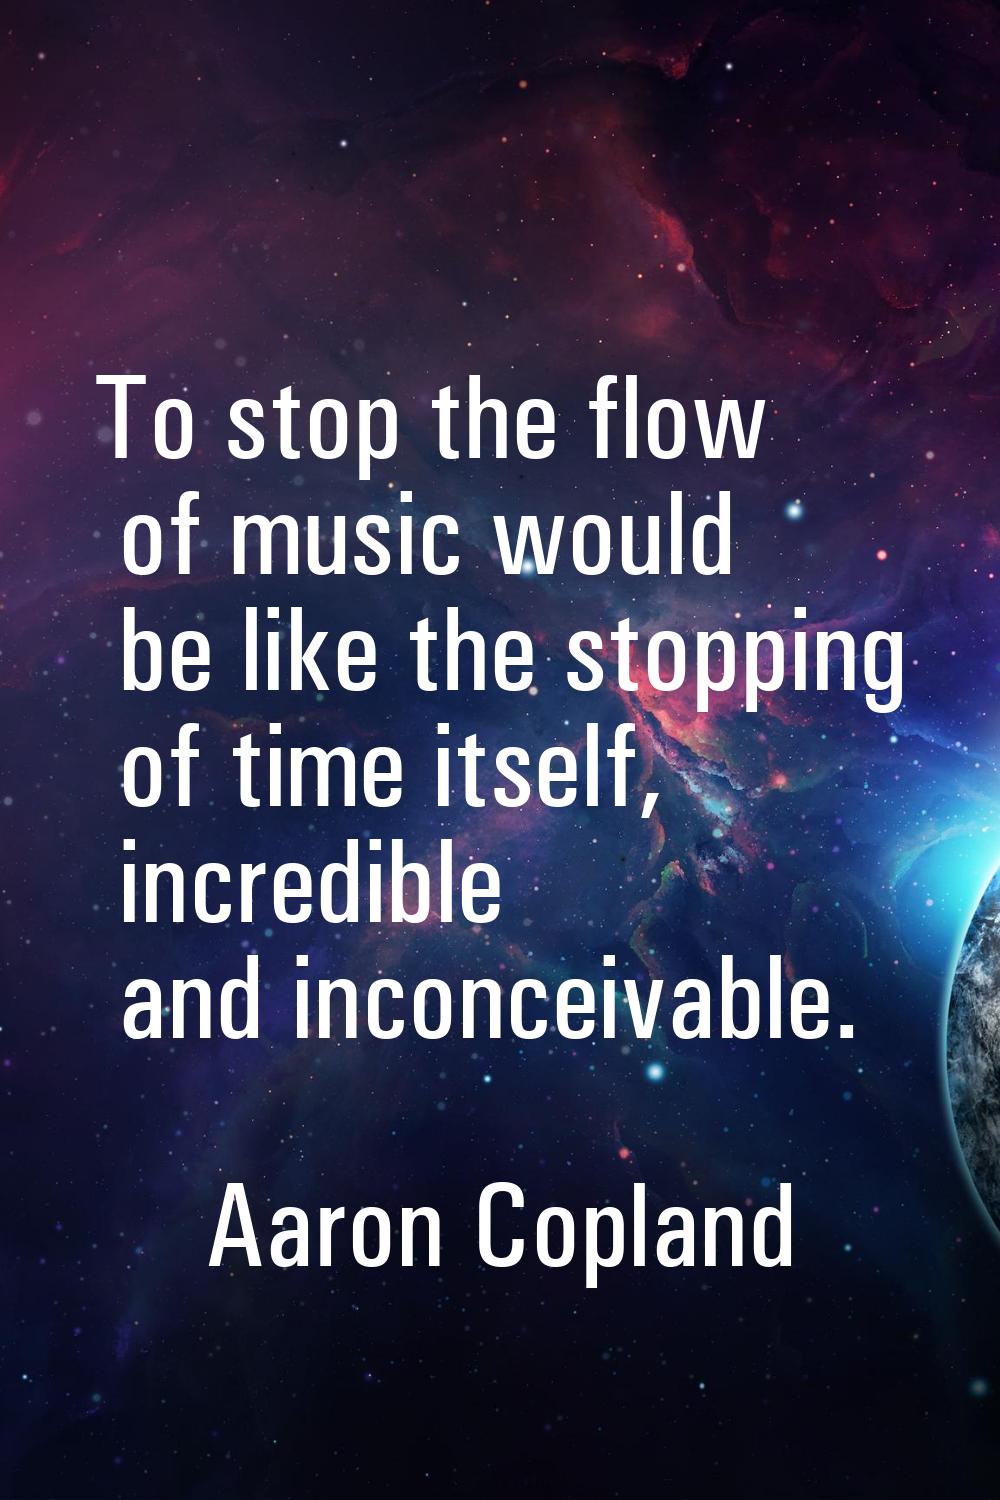 To stop the flow of music would be like the stopping of time itself, incredible and inconceivable.